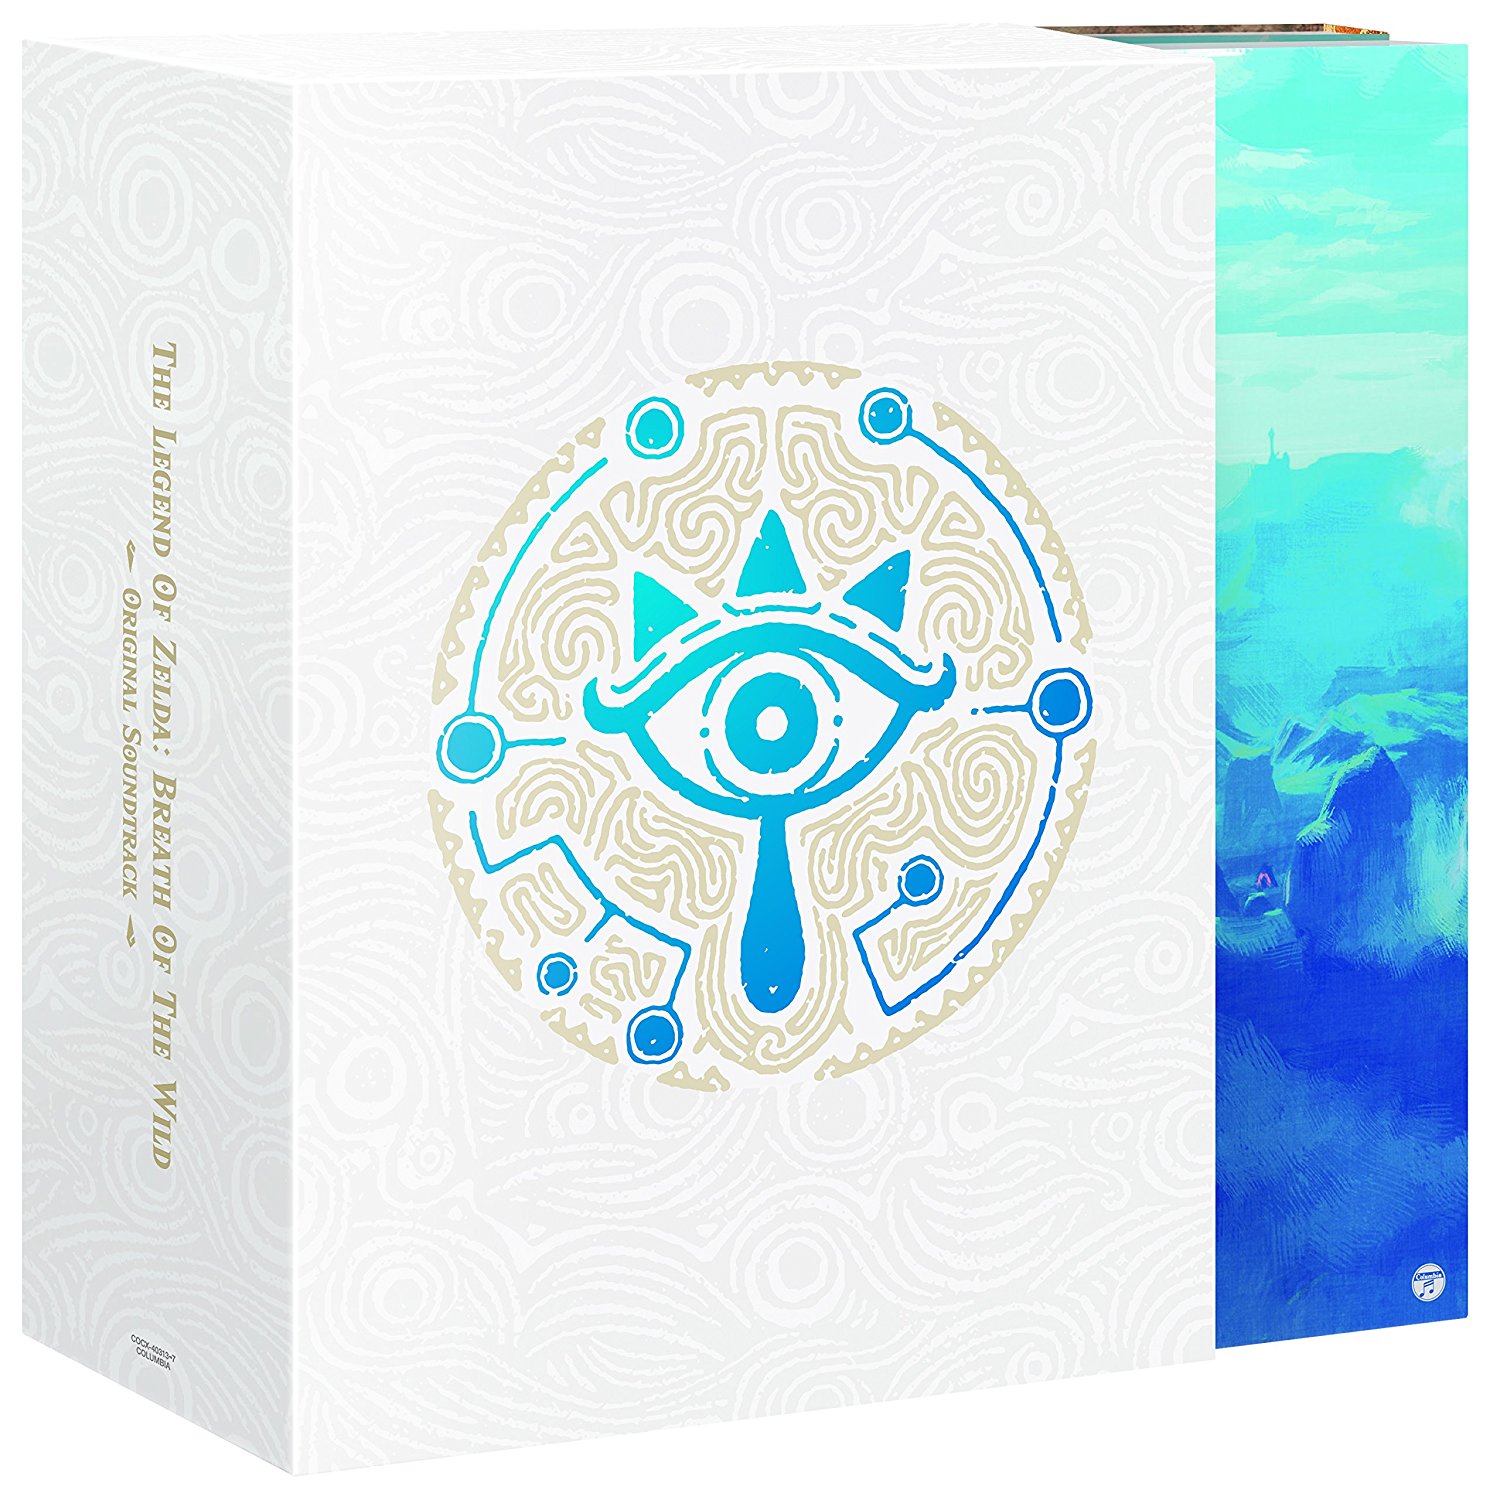 legend of zelda breath of the wild max hearts you can get